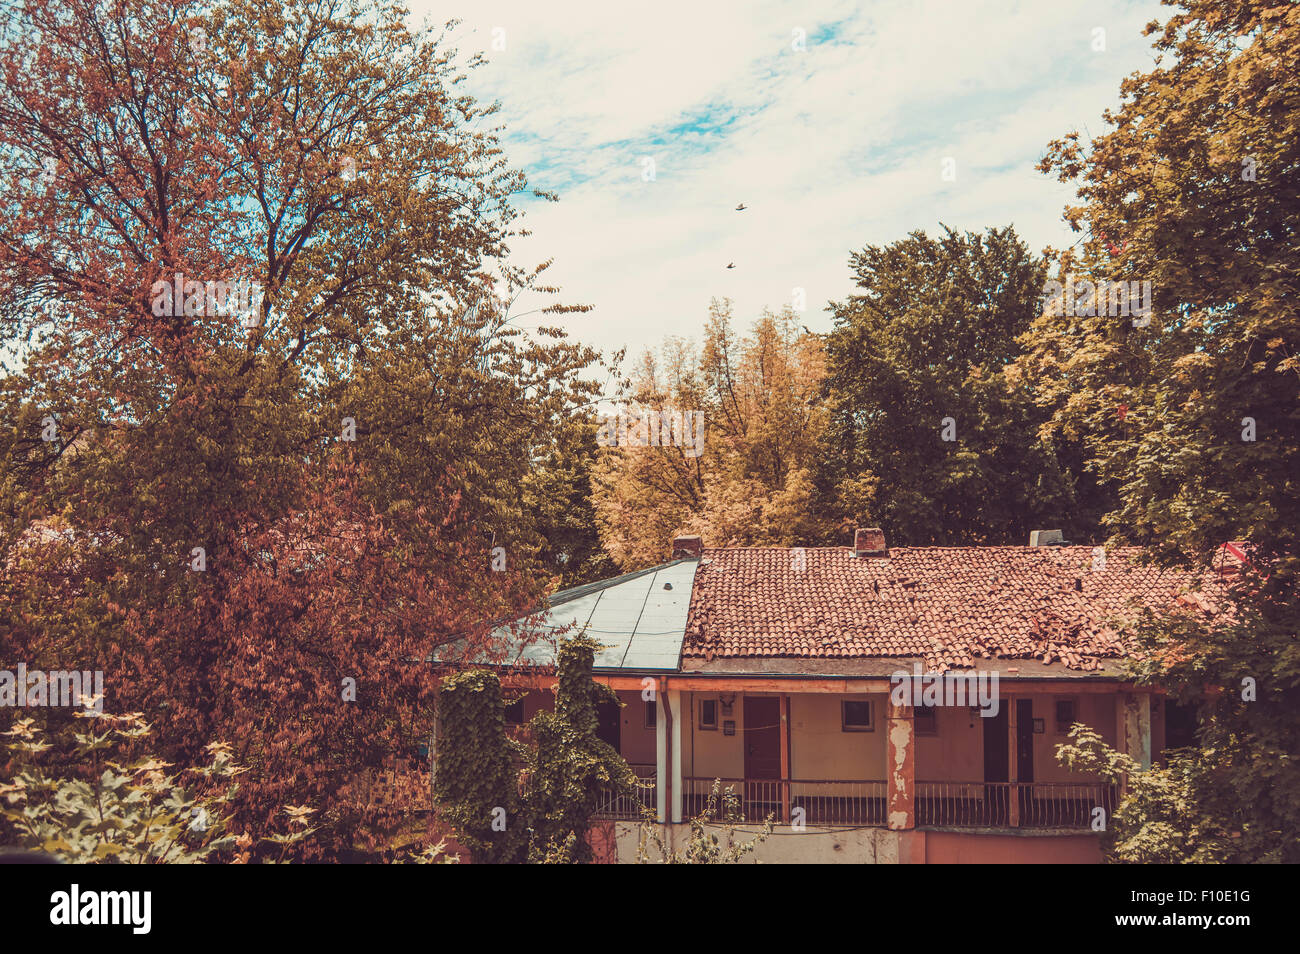 Old house in warm autumn colors Stock Photo